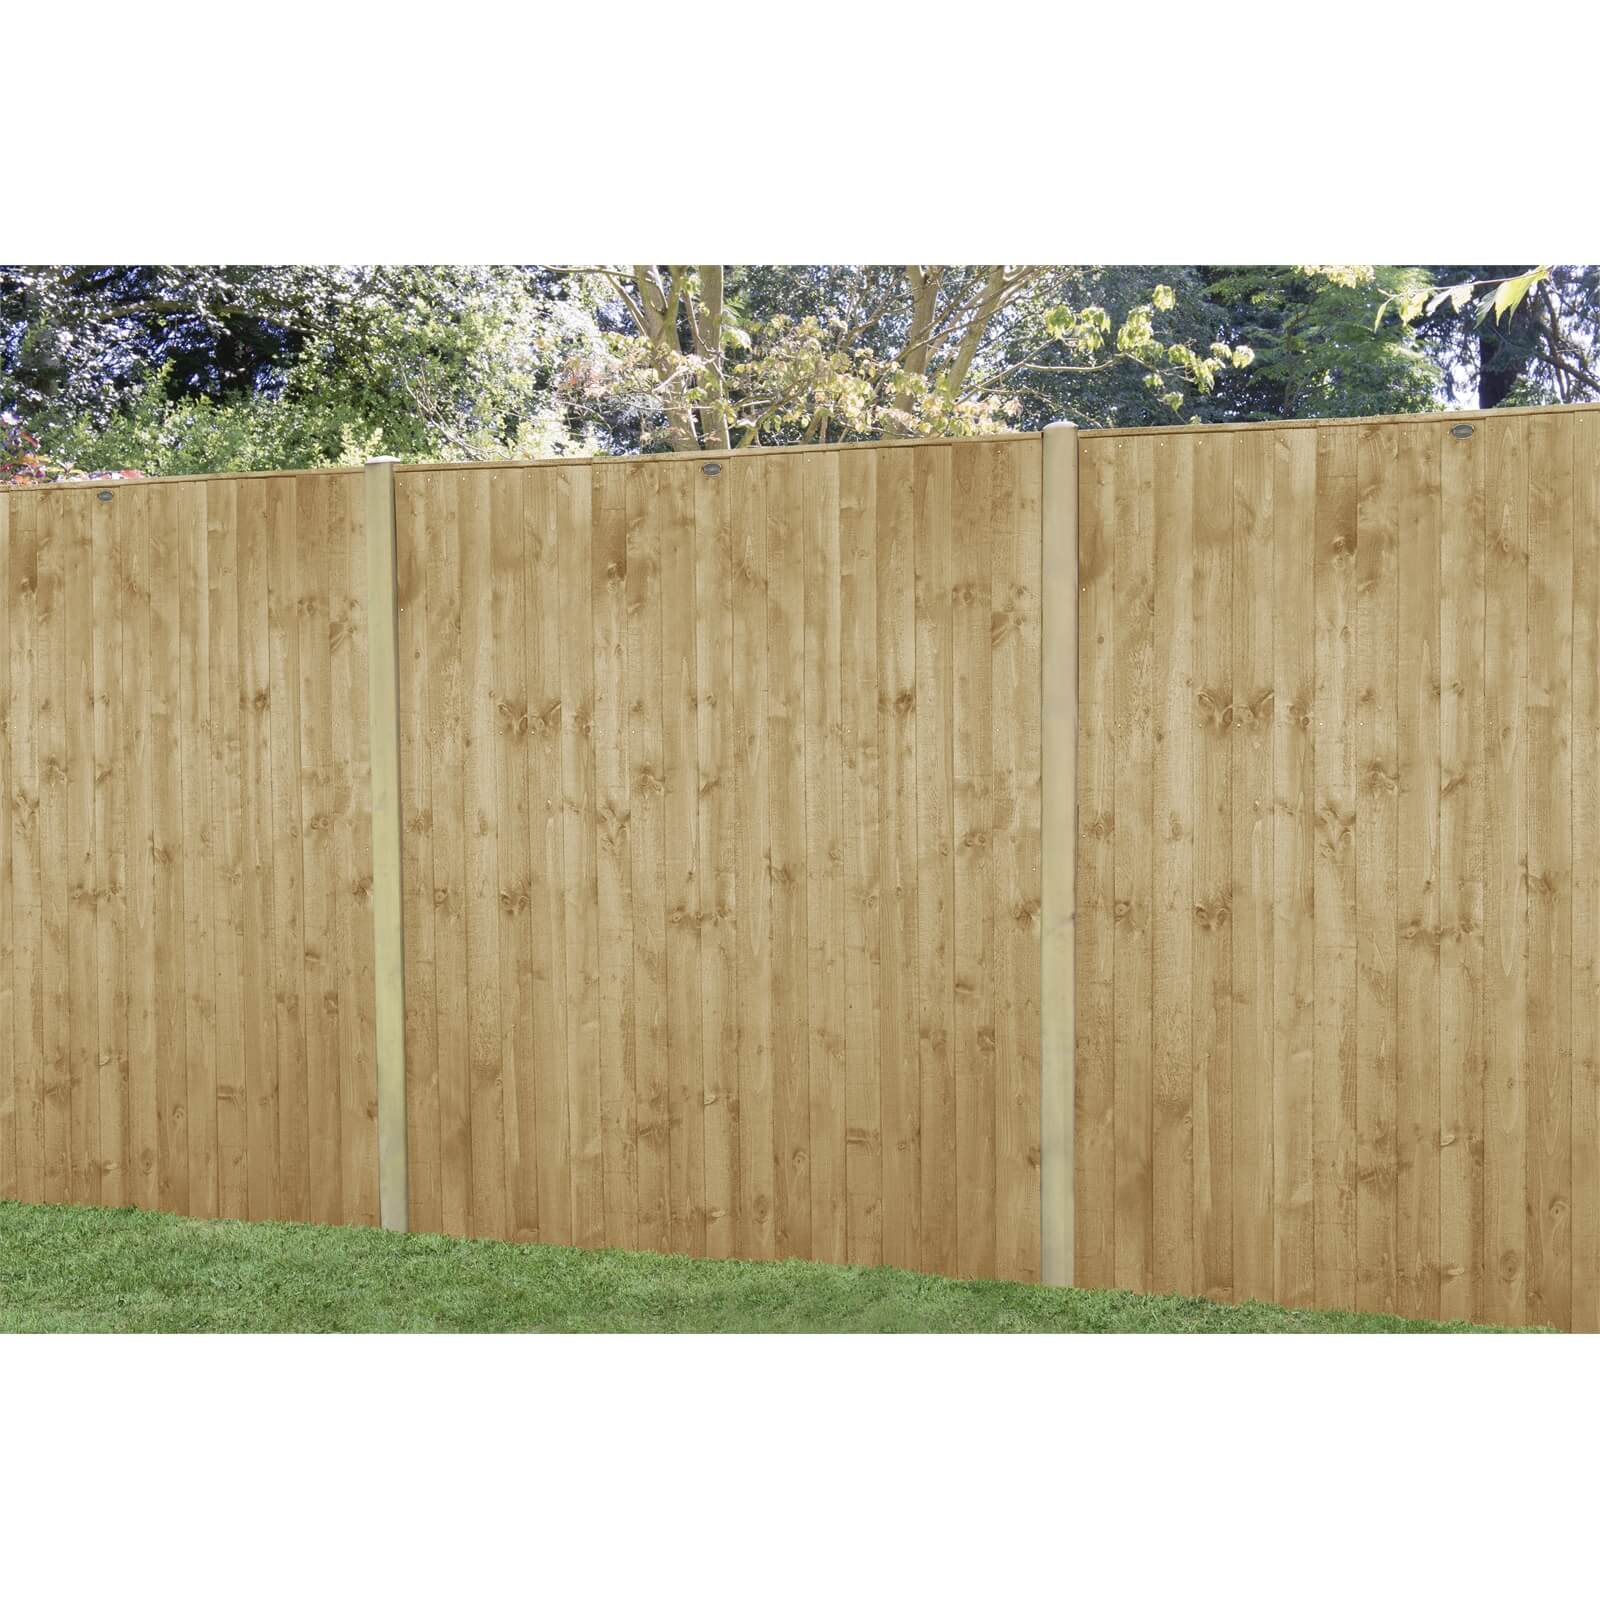 6ft x 6ft (1.83m x 1.85m) Pressure Treated Featheredge Fence Panel - Pack of 5